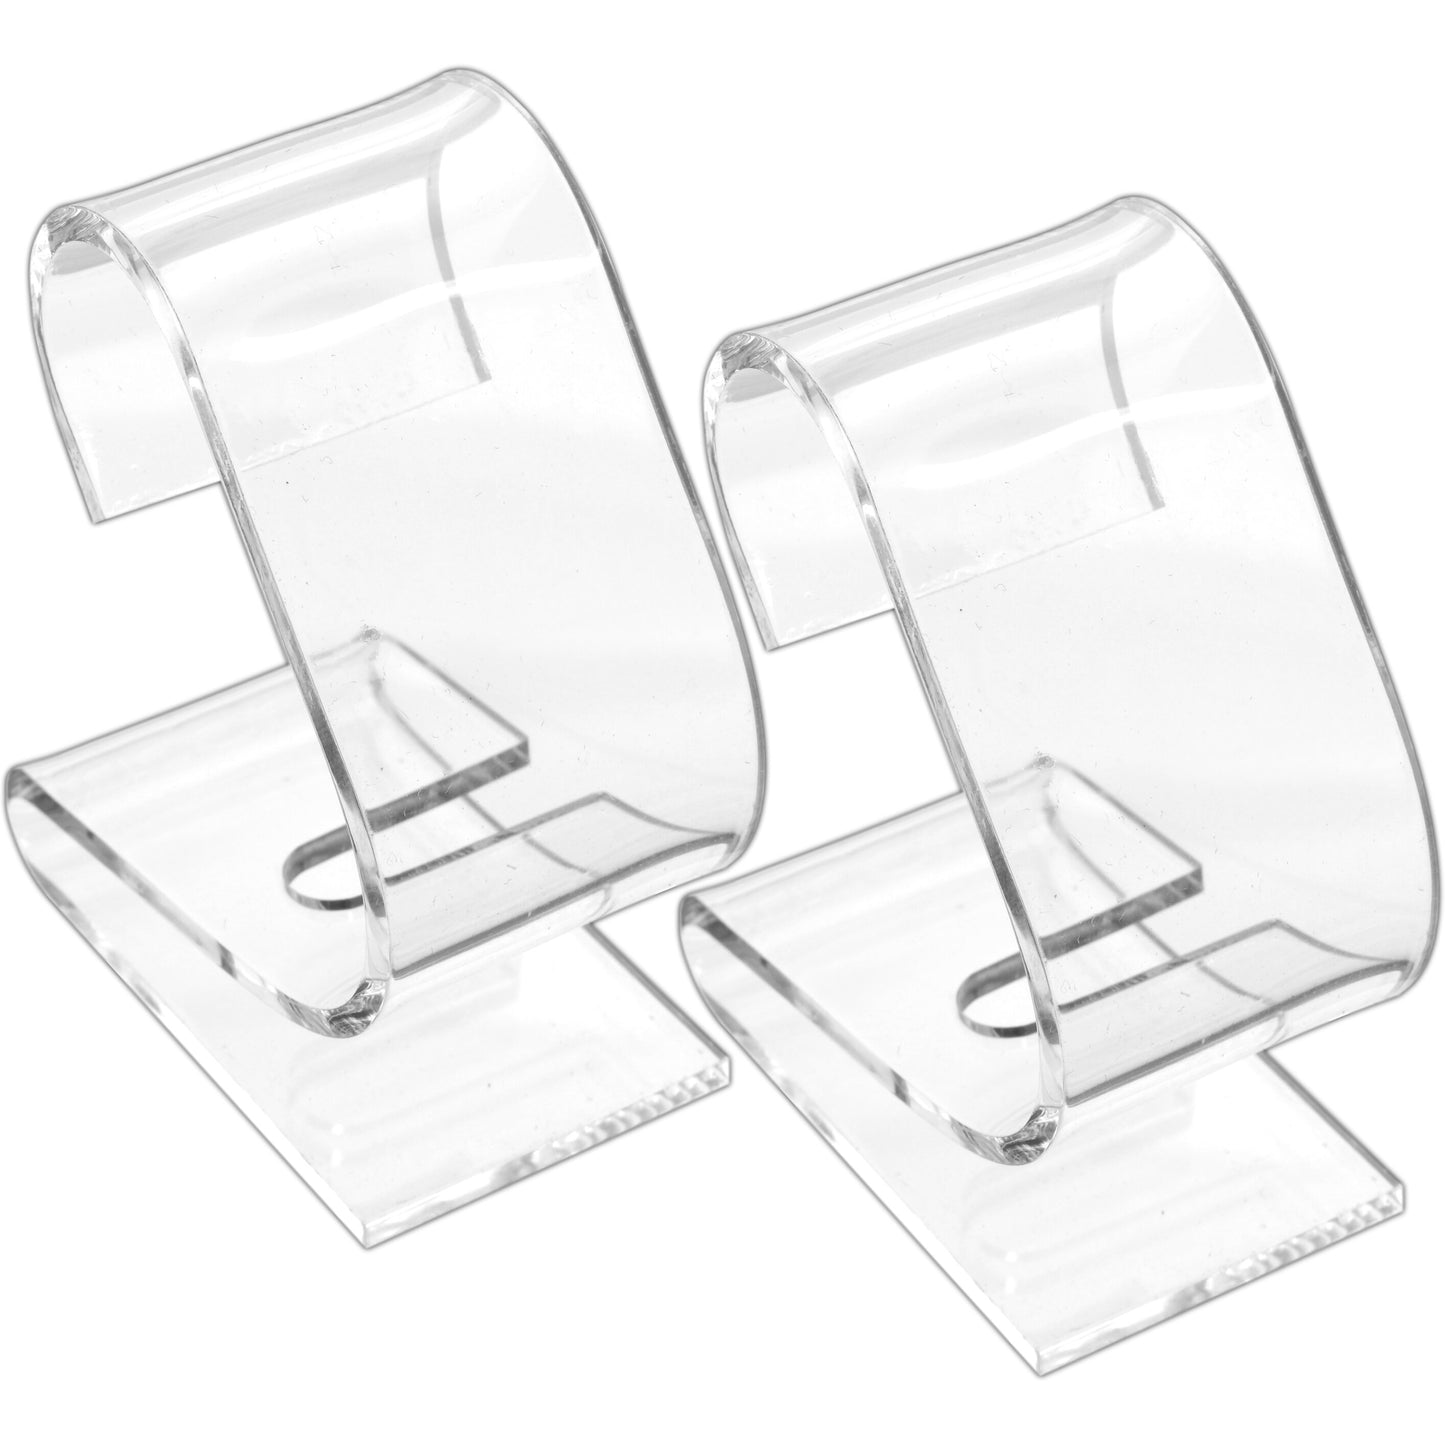 2 Clear Watch Displays Acrylic Stand Showcases Tools